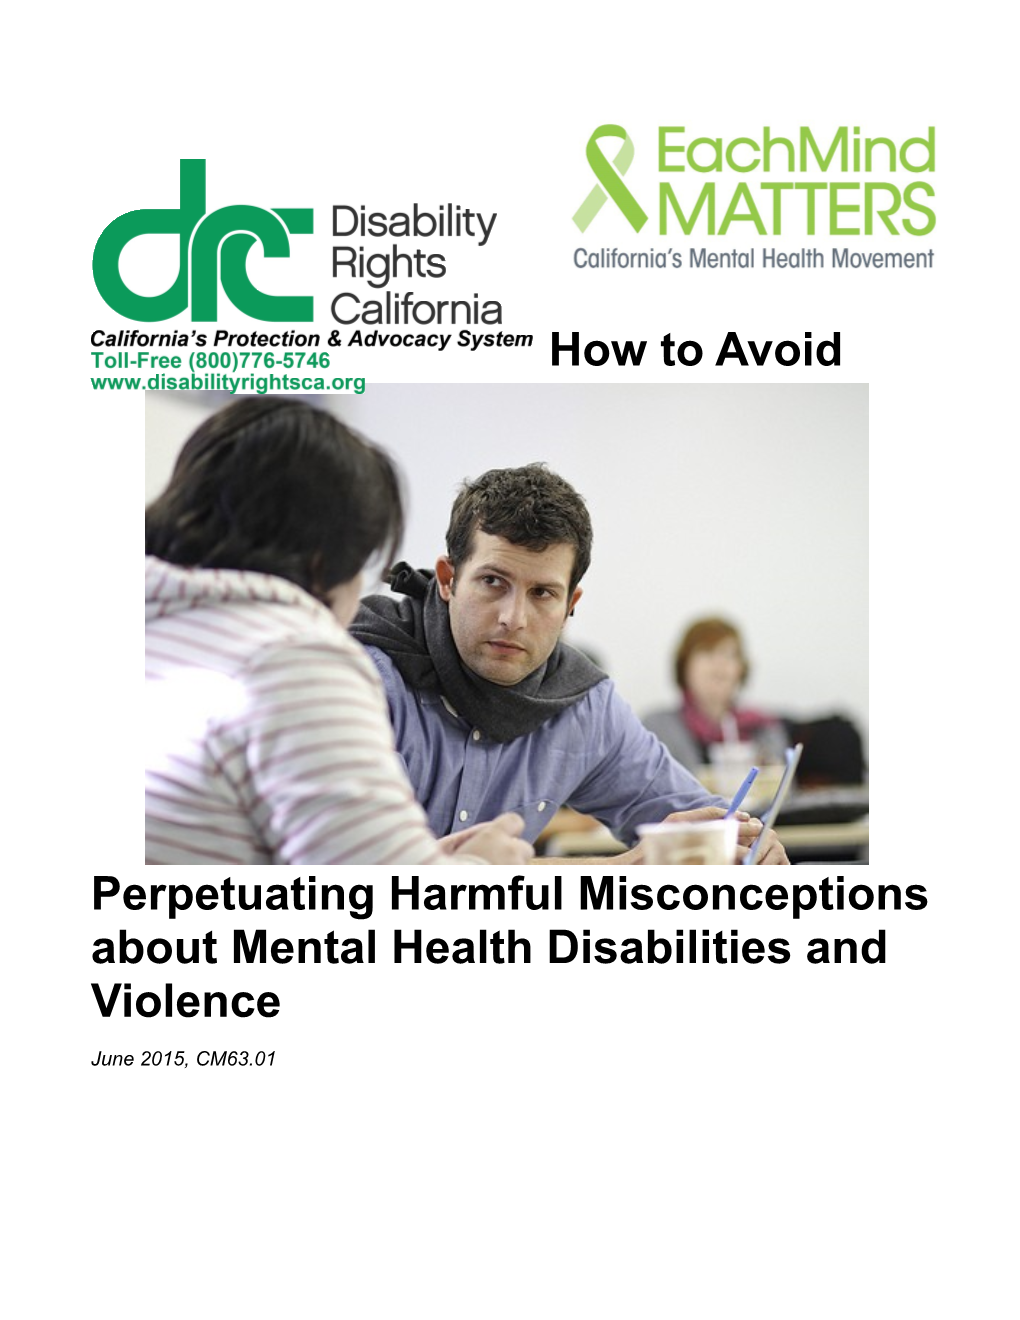 How to Avoid Perpetuating Harmful Misconceptions About Mental Health Disabilities and Violence